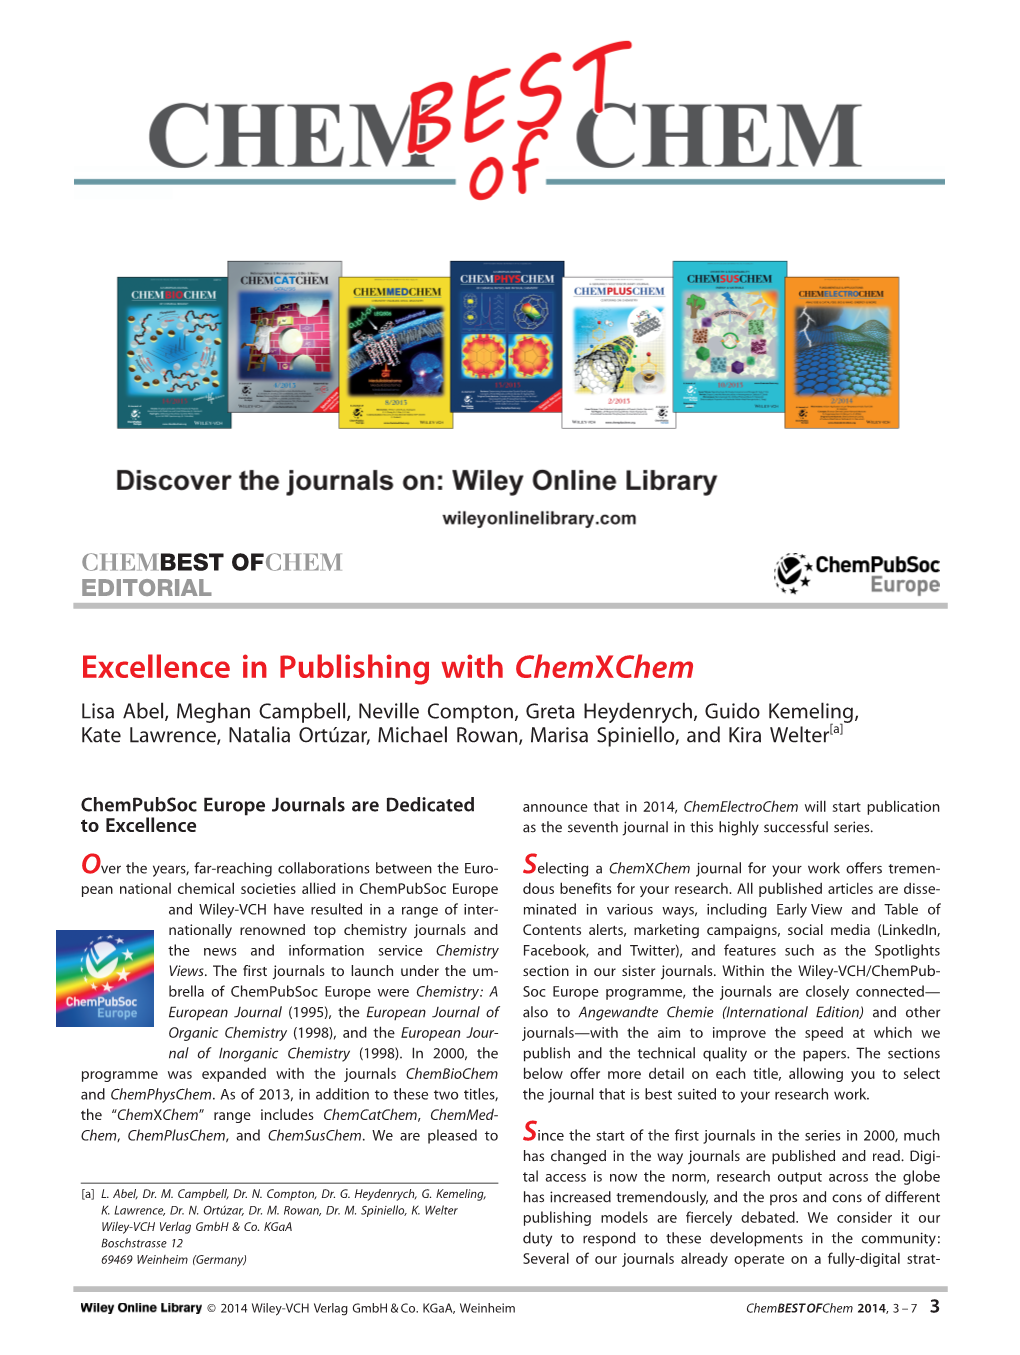 Excellence in Publishing with Chemxchem